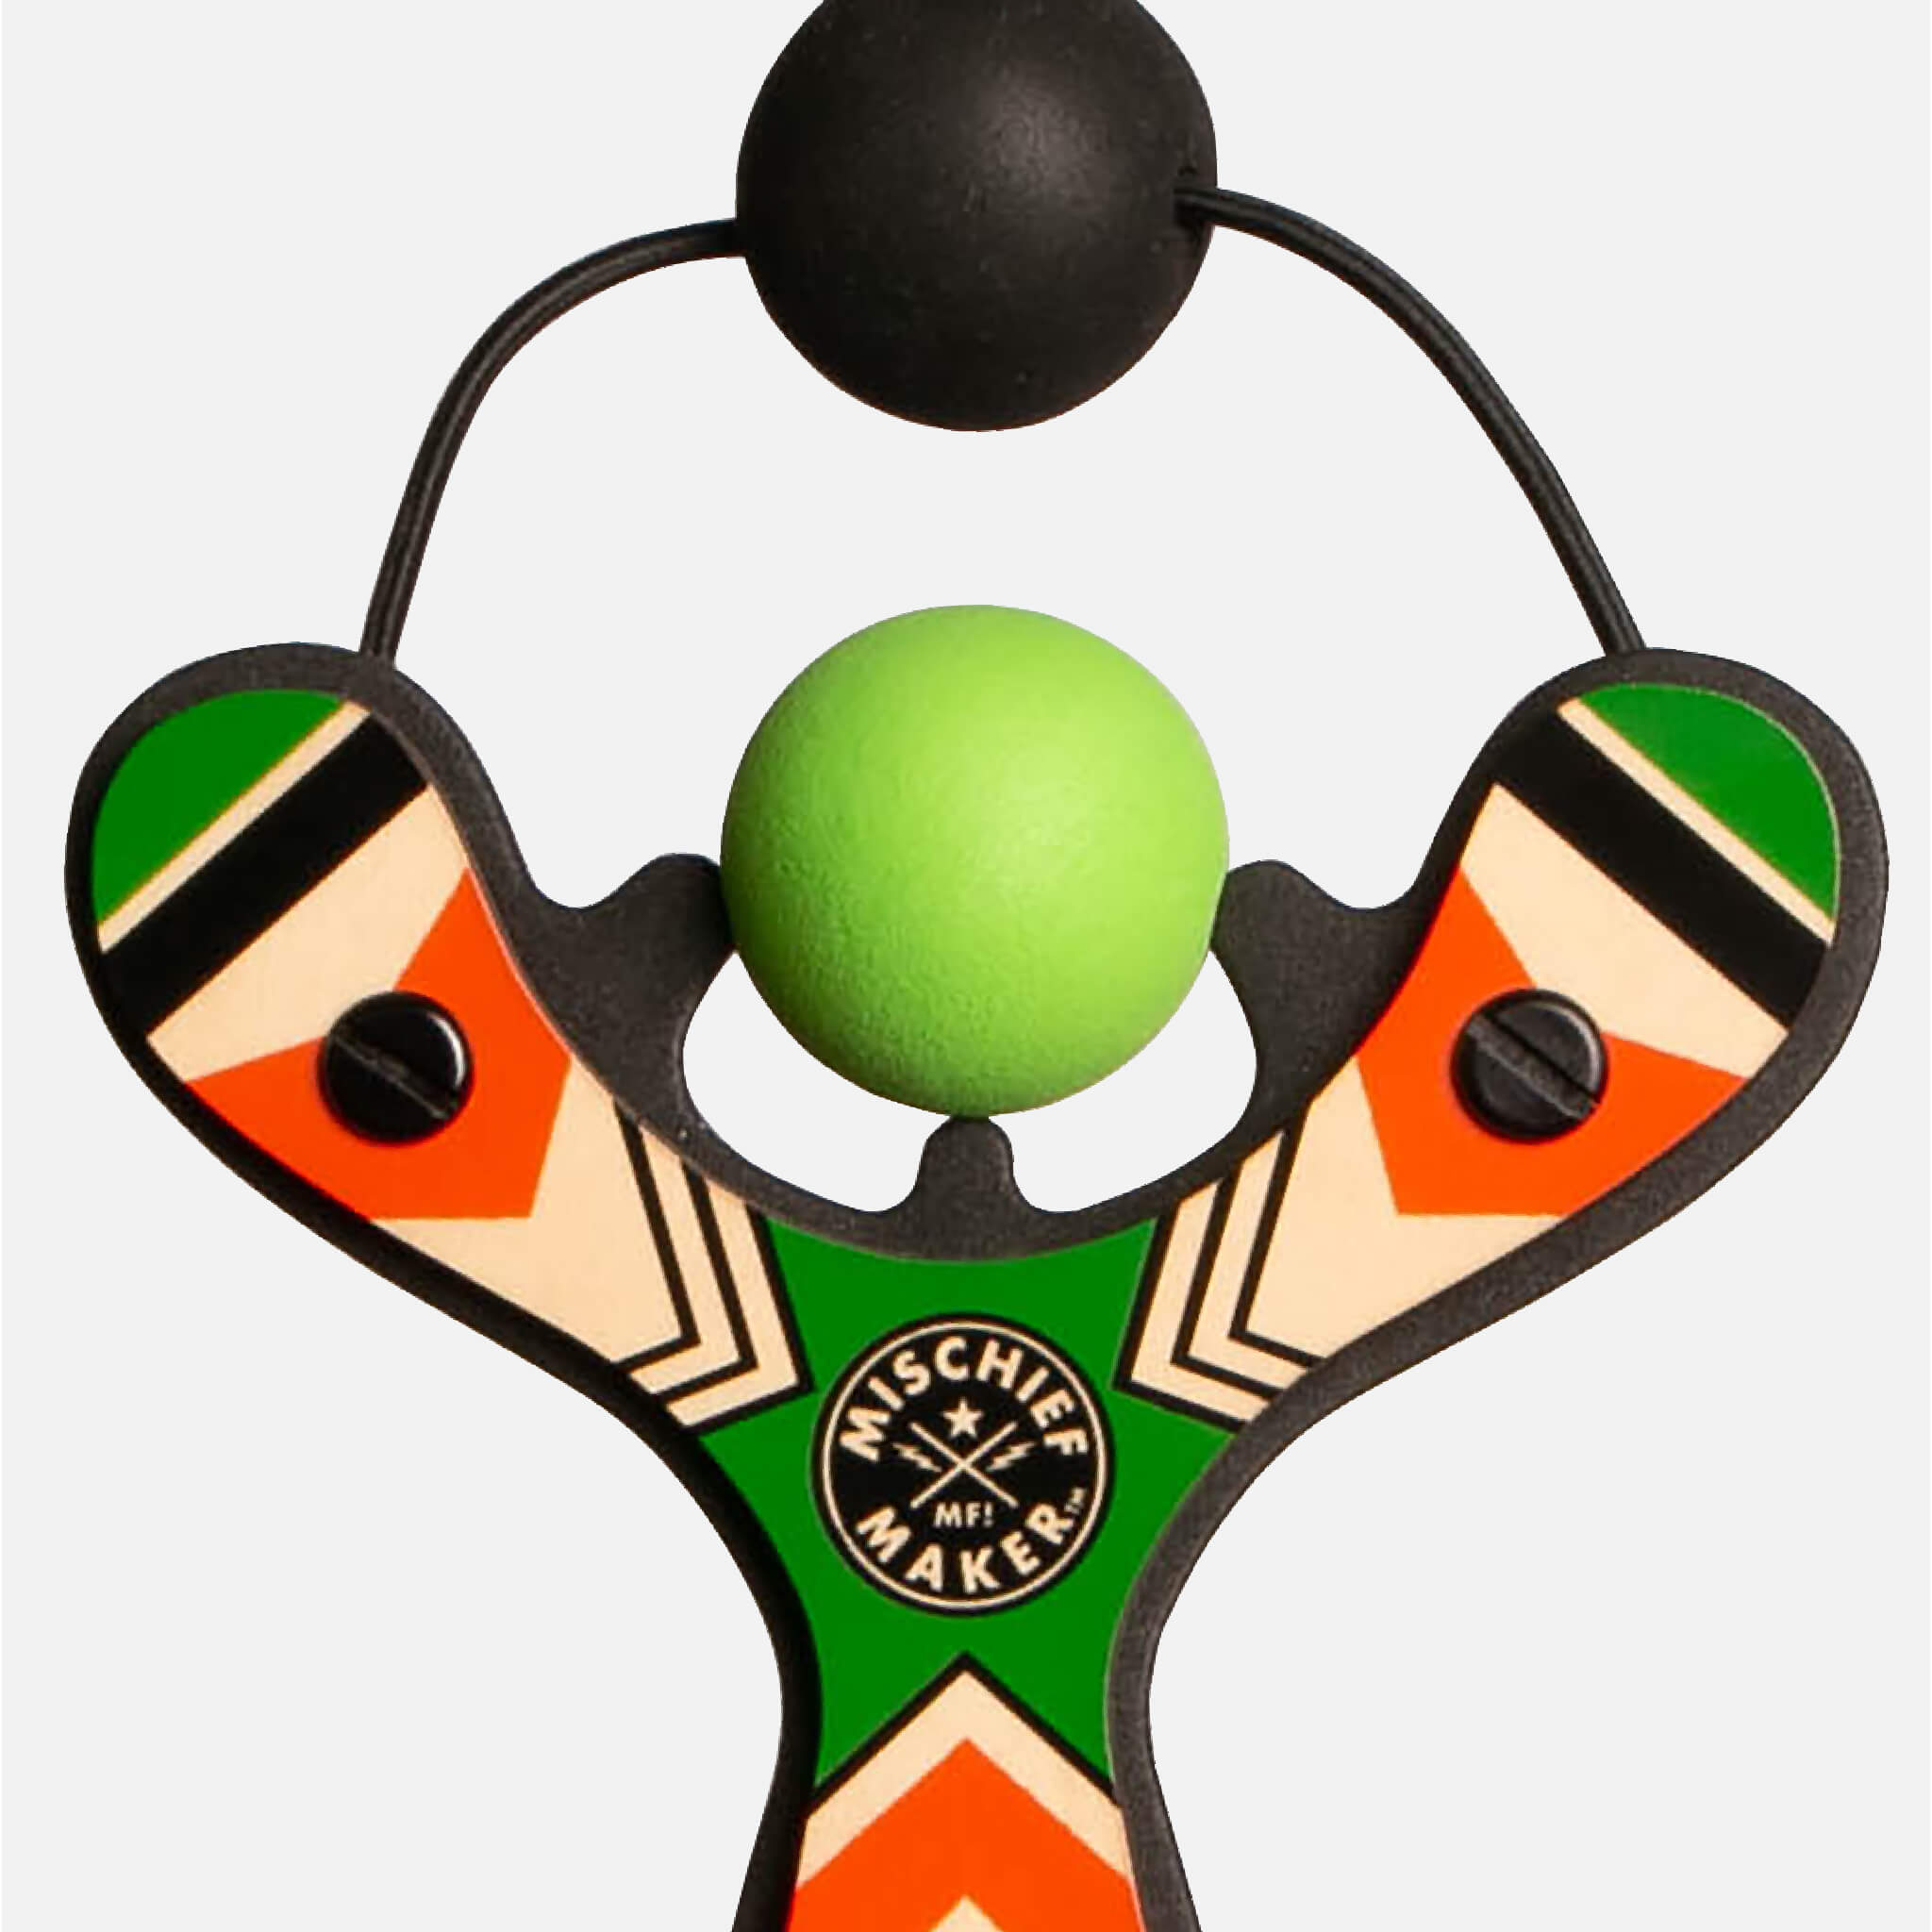 Green Classic wood slingshot with ball foam ball loaded. Mischief Maker by Mighty Fun!